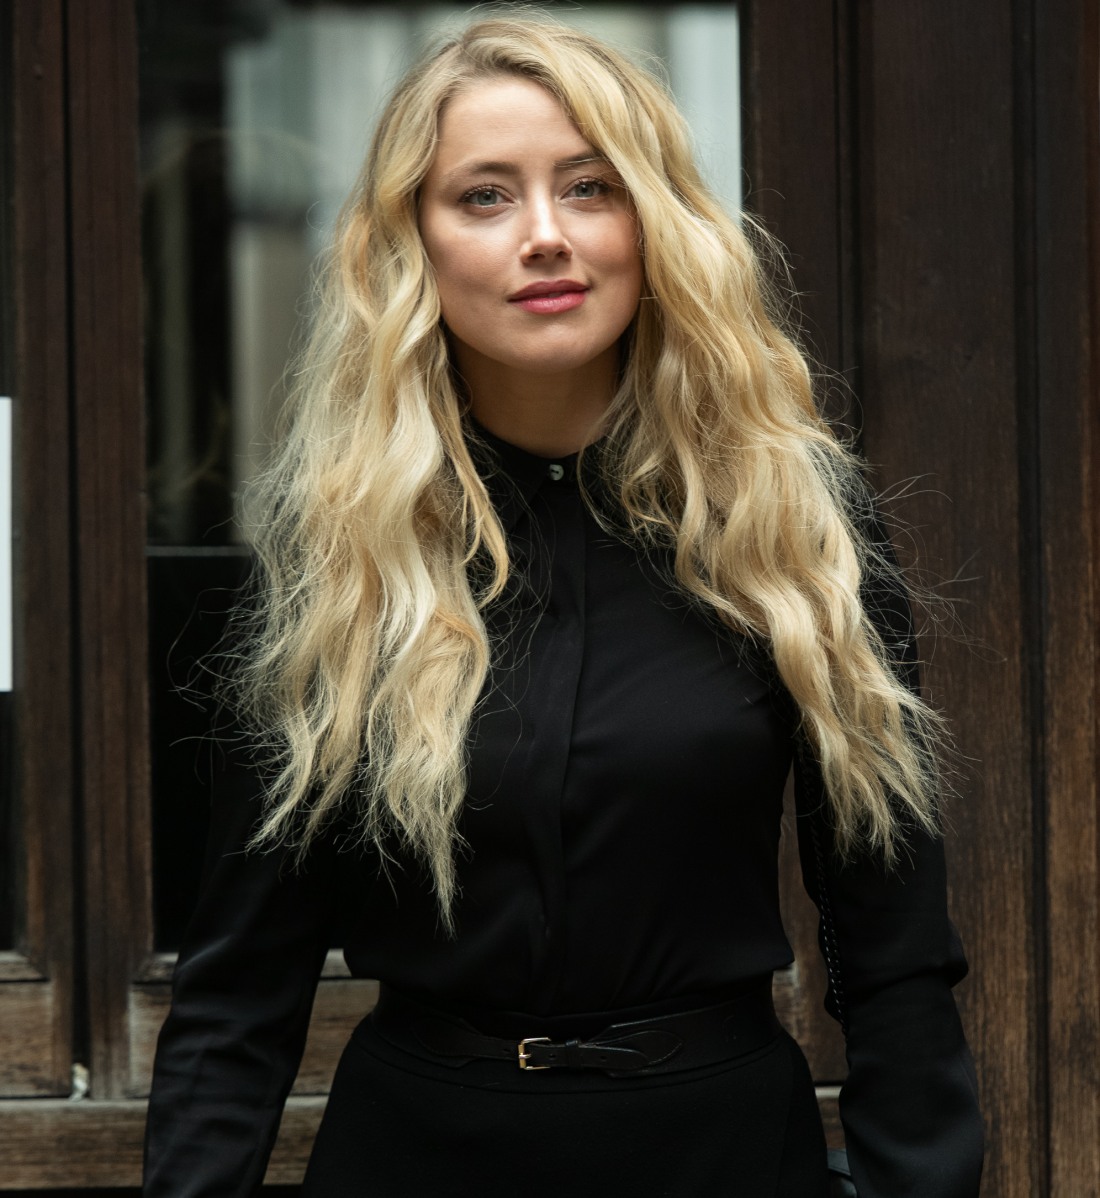 Amber Heard Arrives at Court Day Sixteen - Tuesday 28 July - Royal Courts Of Justice, London